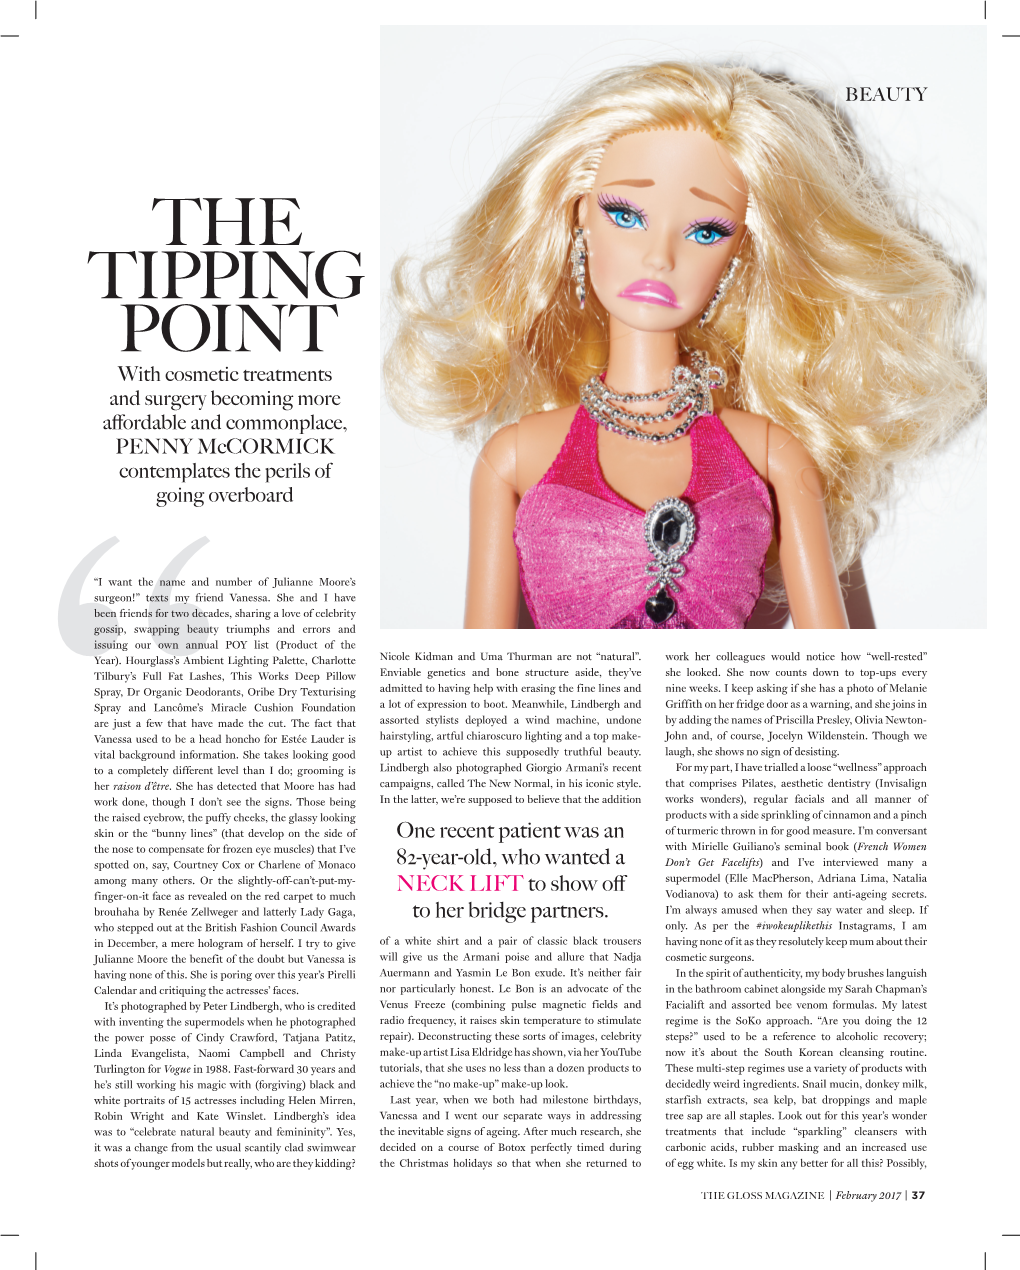 THE TIPPING POINT with Cosmetic Treatments and Surgery Becoming More Affordable and Commonplace, PENNY Mccormick Contemplates the Perils of Going Overboard